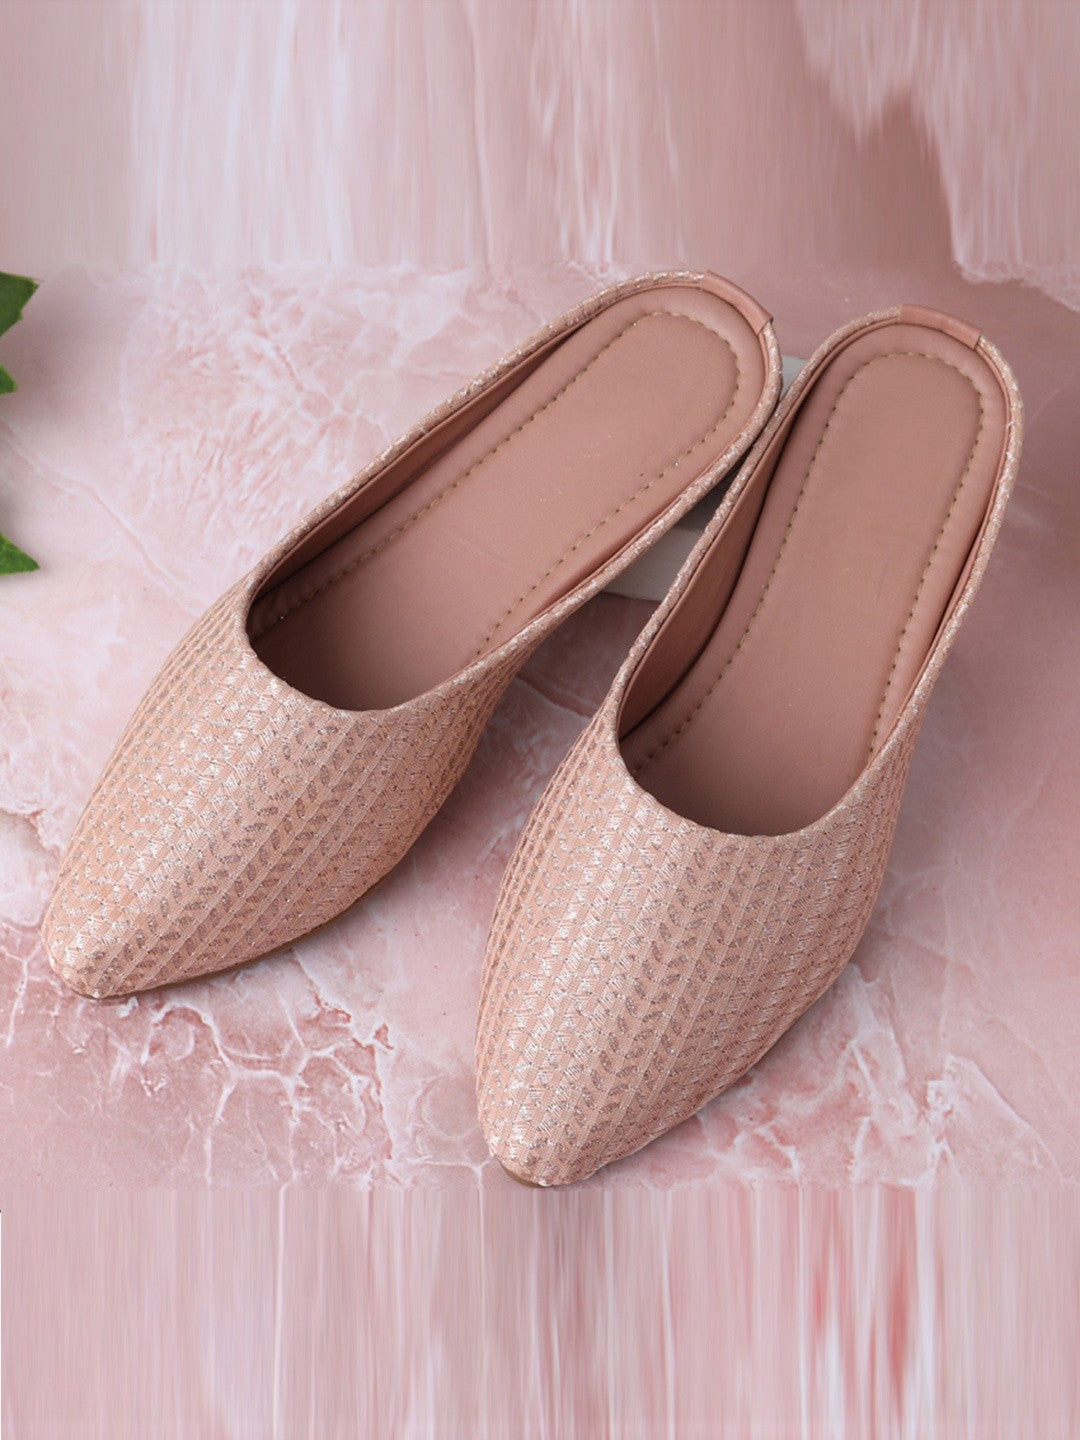 Women Pink Textured Leather Ethnic Flats